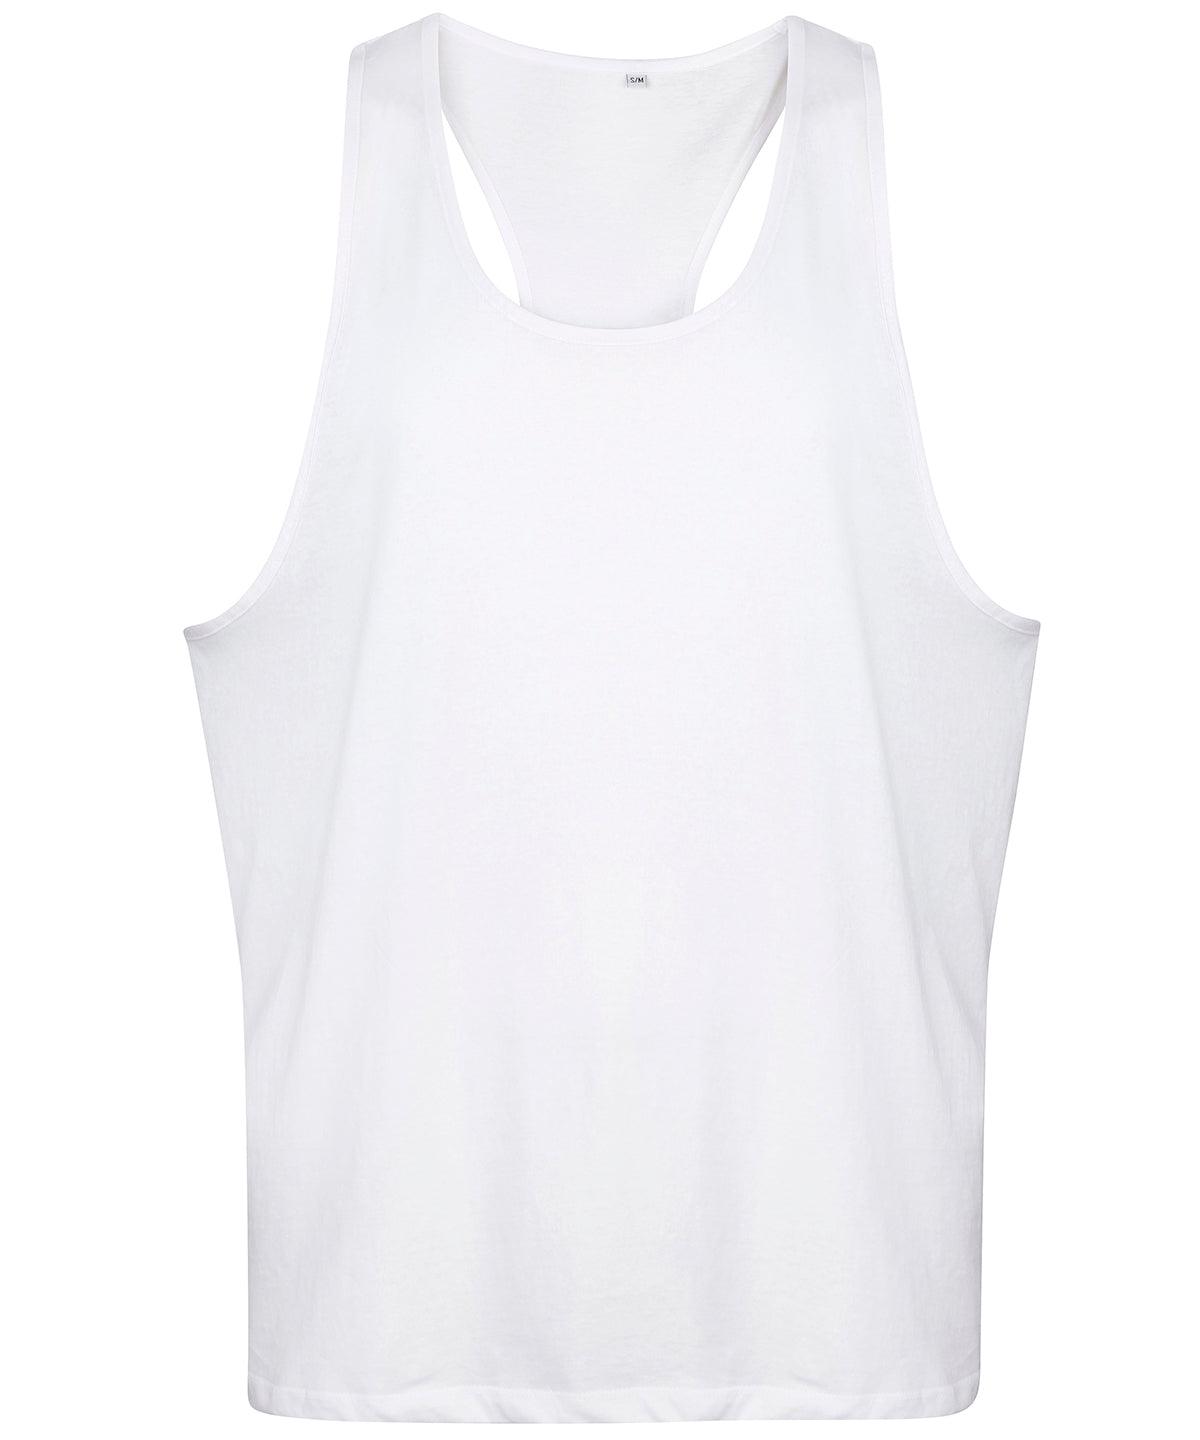 White - Tanx vest top Vests Last Chance to Buy Raladeal - High Stock, Rebrandable, T-Shirts & Vests Schoolwear Centres